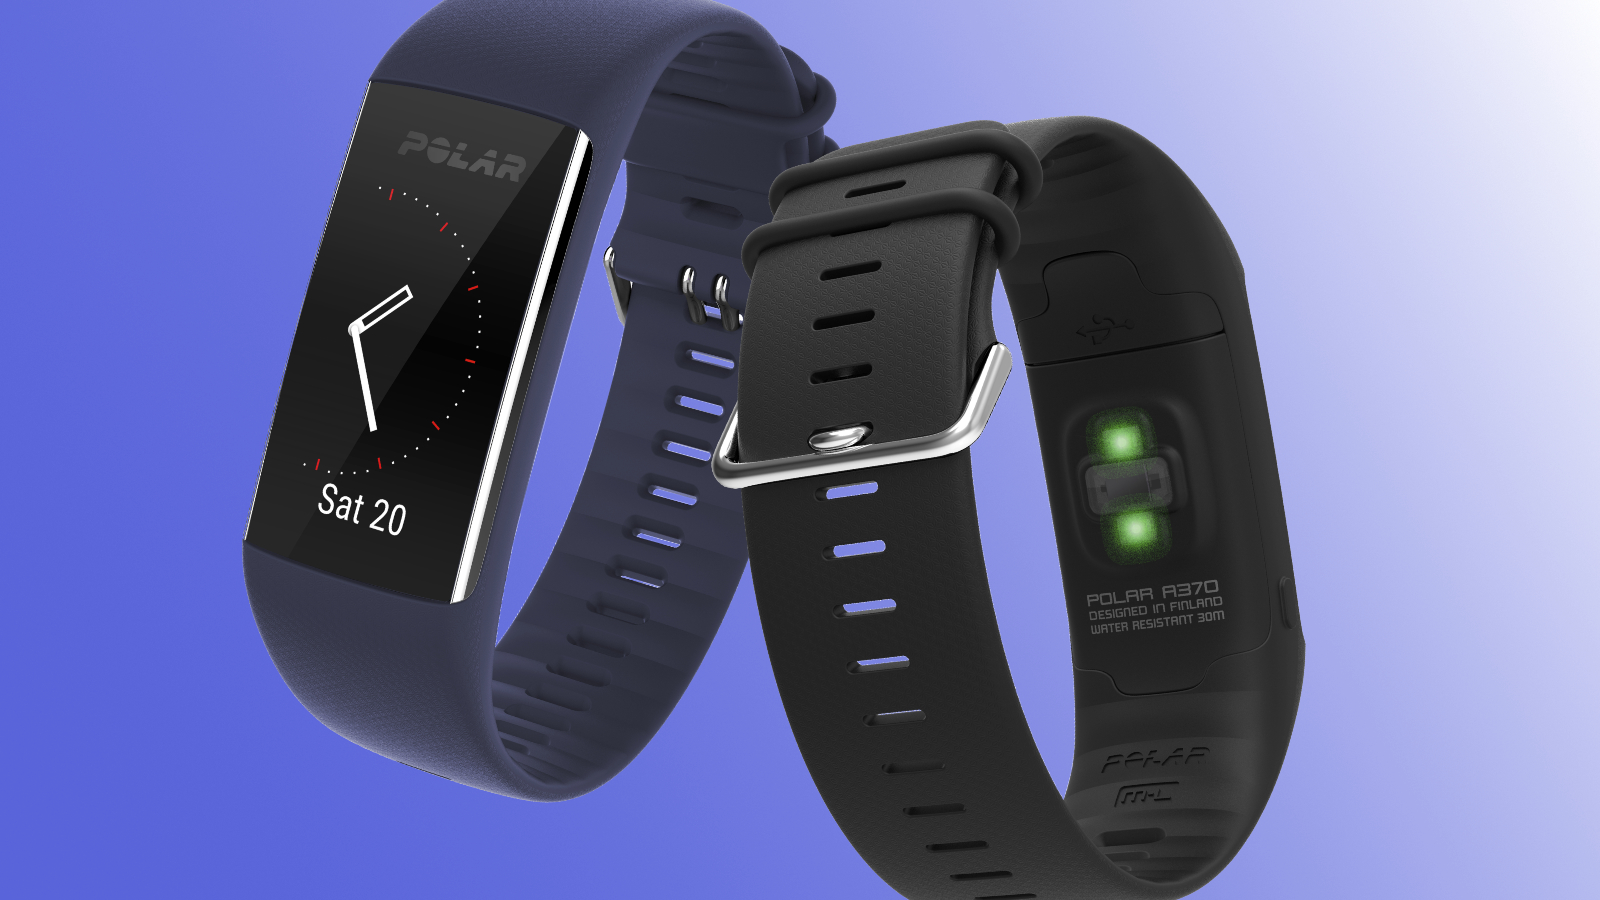 The Polar A370 takes on Fitbit in more 